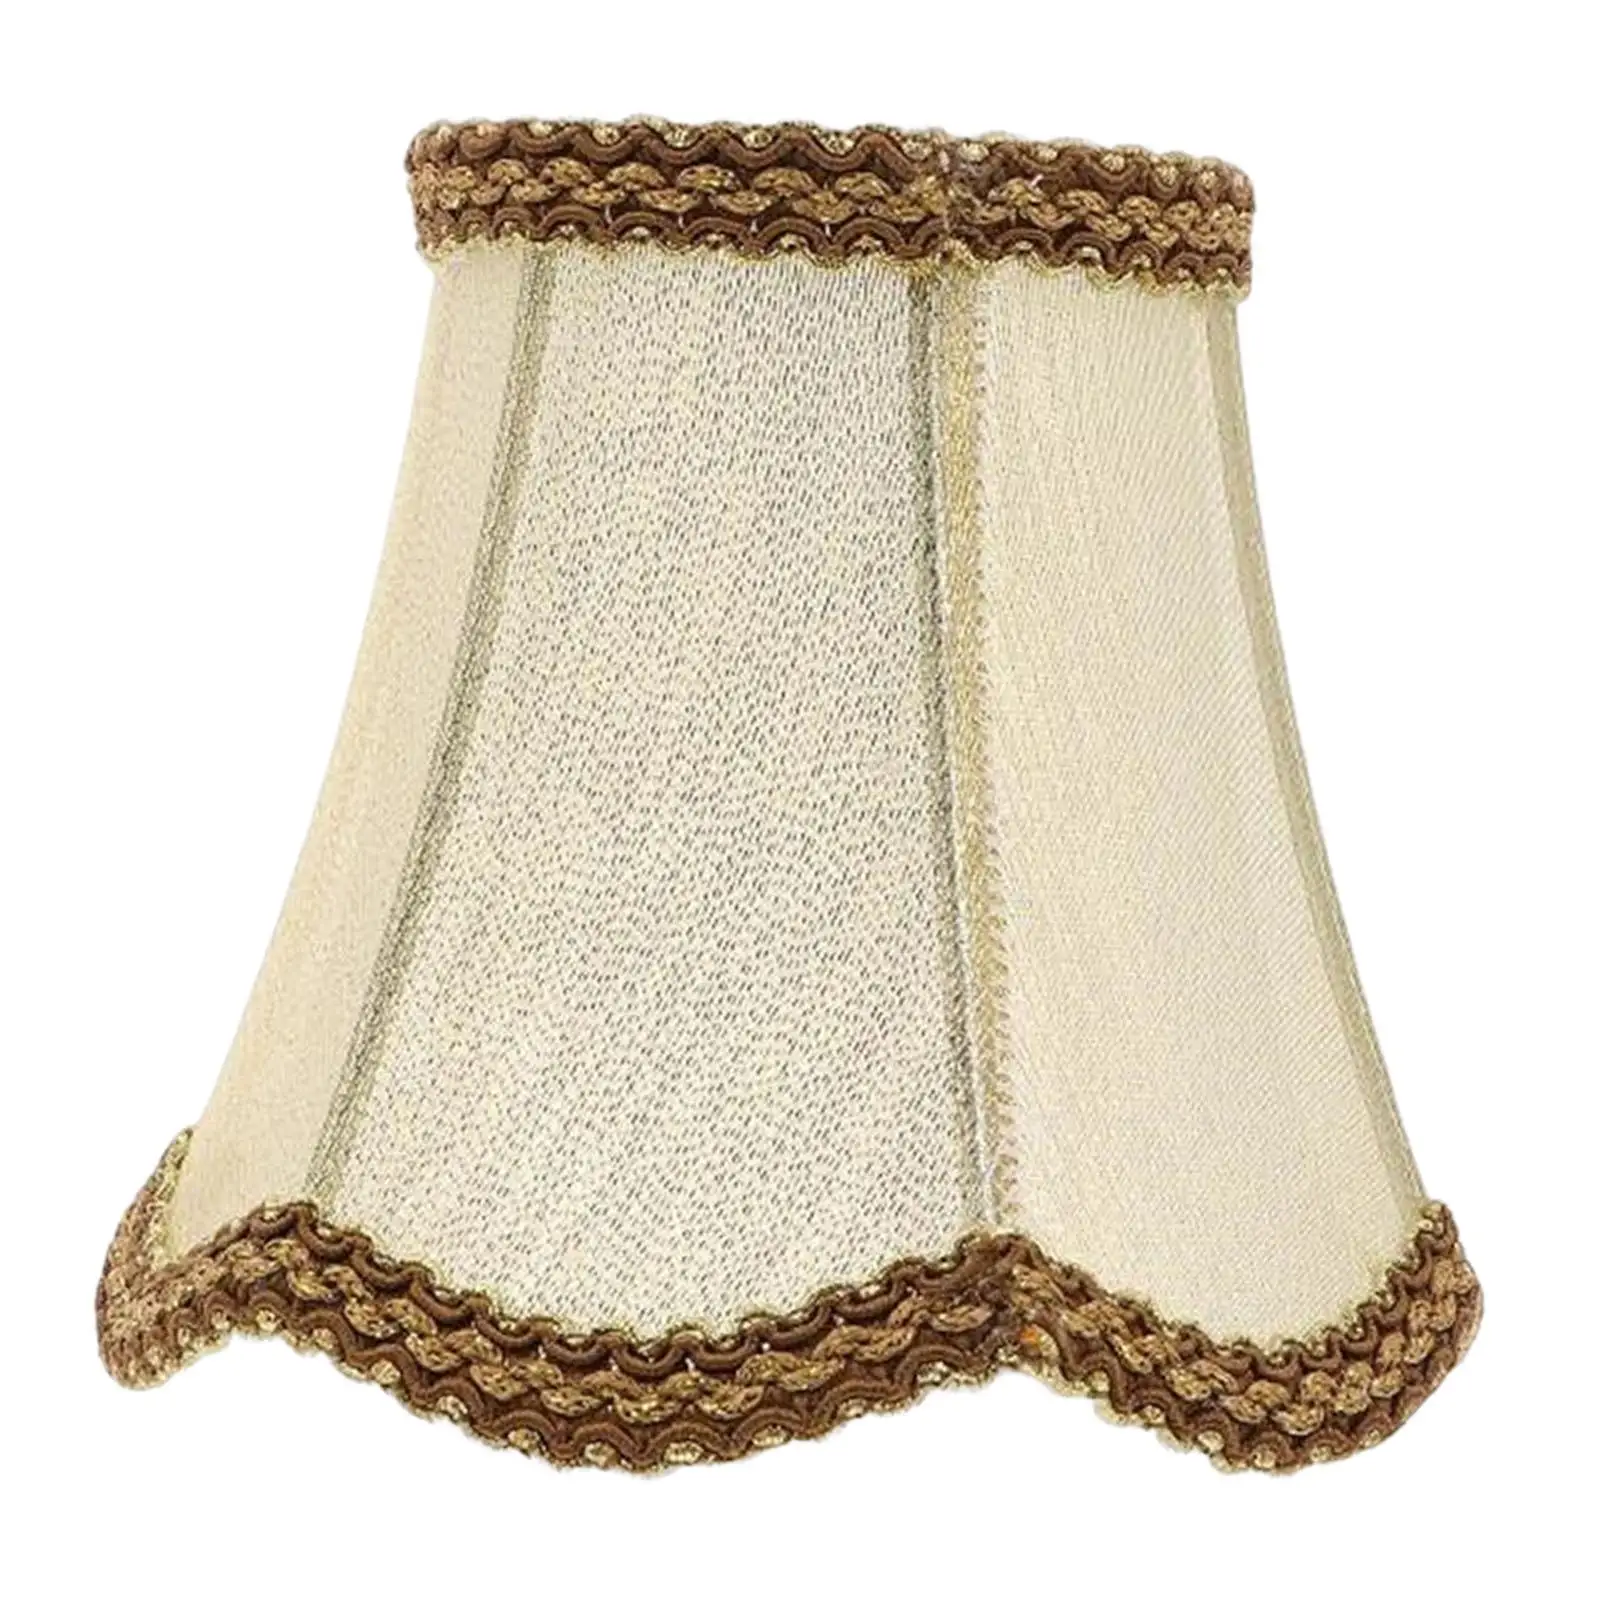 Rustic Style Lampshade Pendant Light Lamp Shade for Kitchen Restaurant